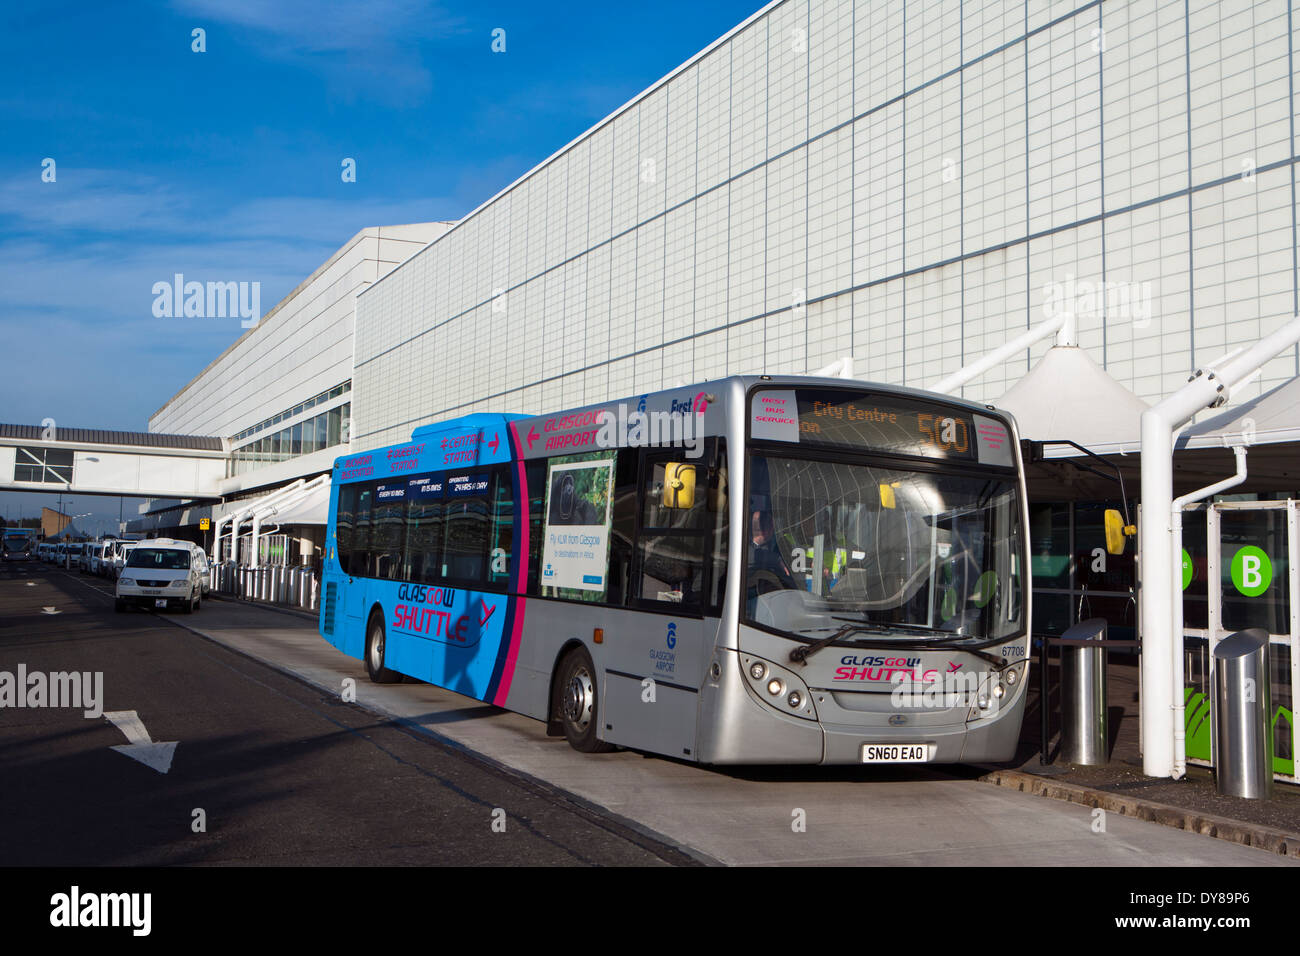 Glasgow airport exterior with bus & taxis Stock Photo